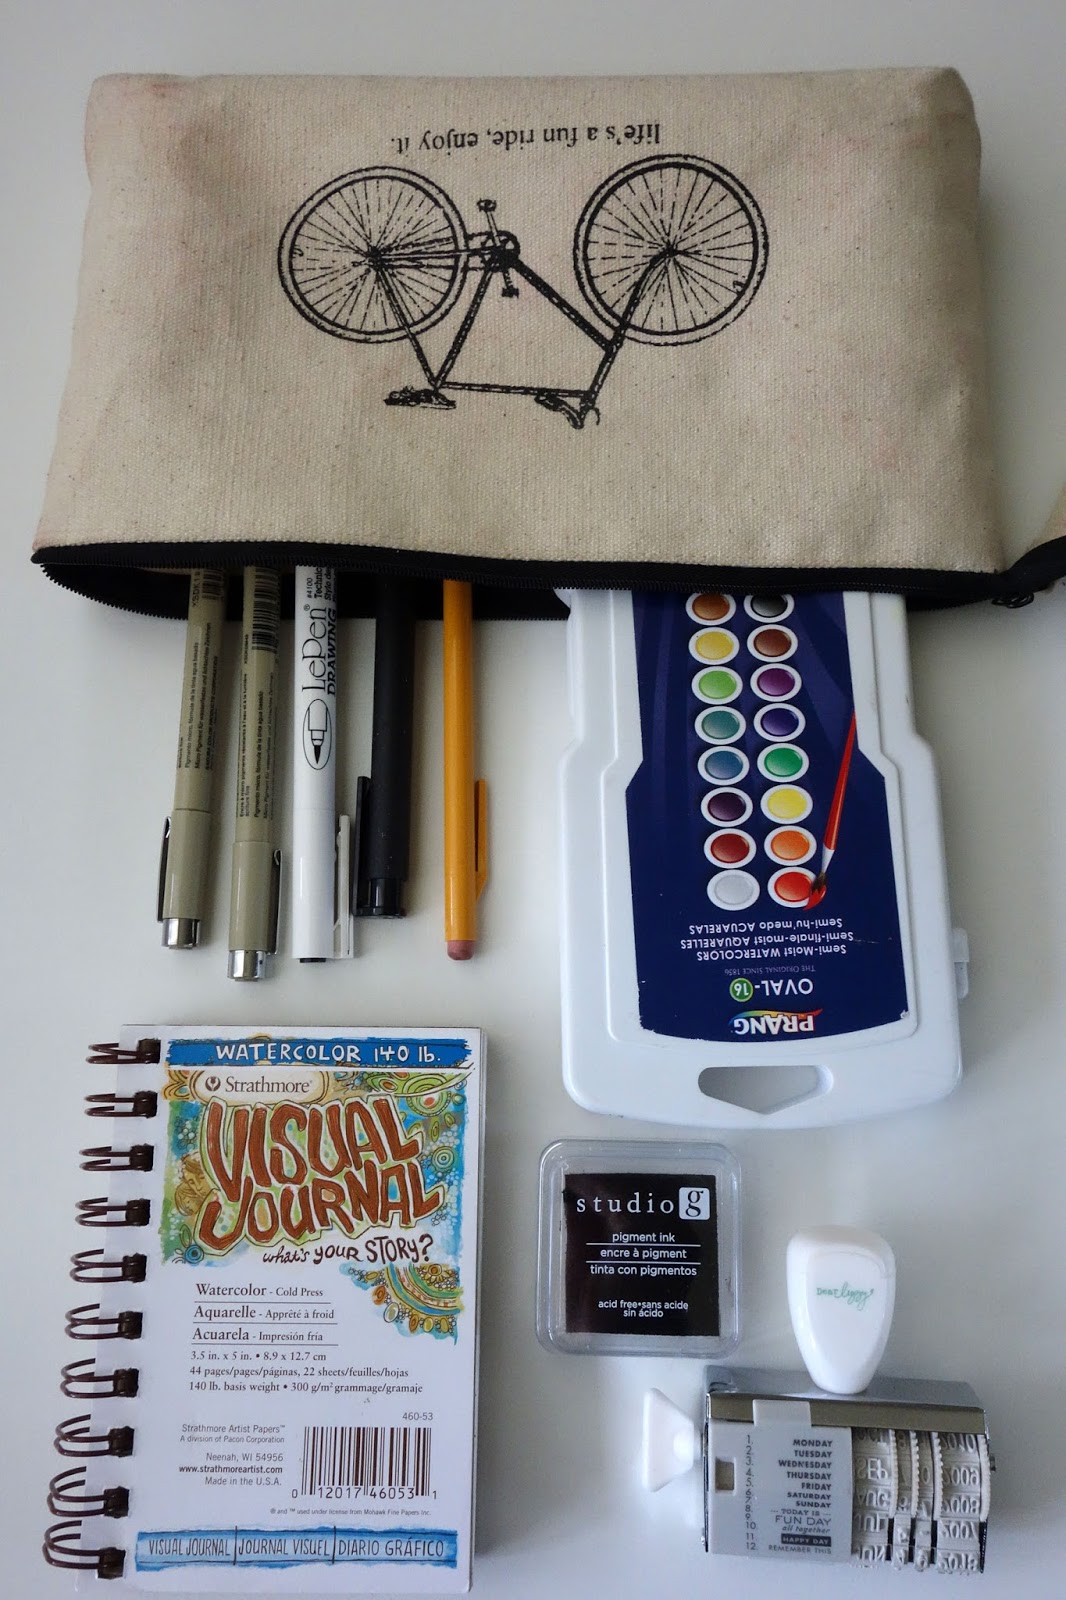 What's in My Travel Journal Kit 